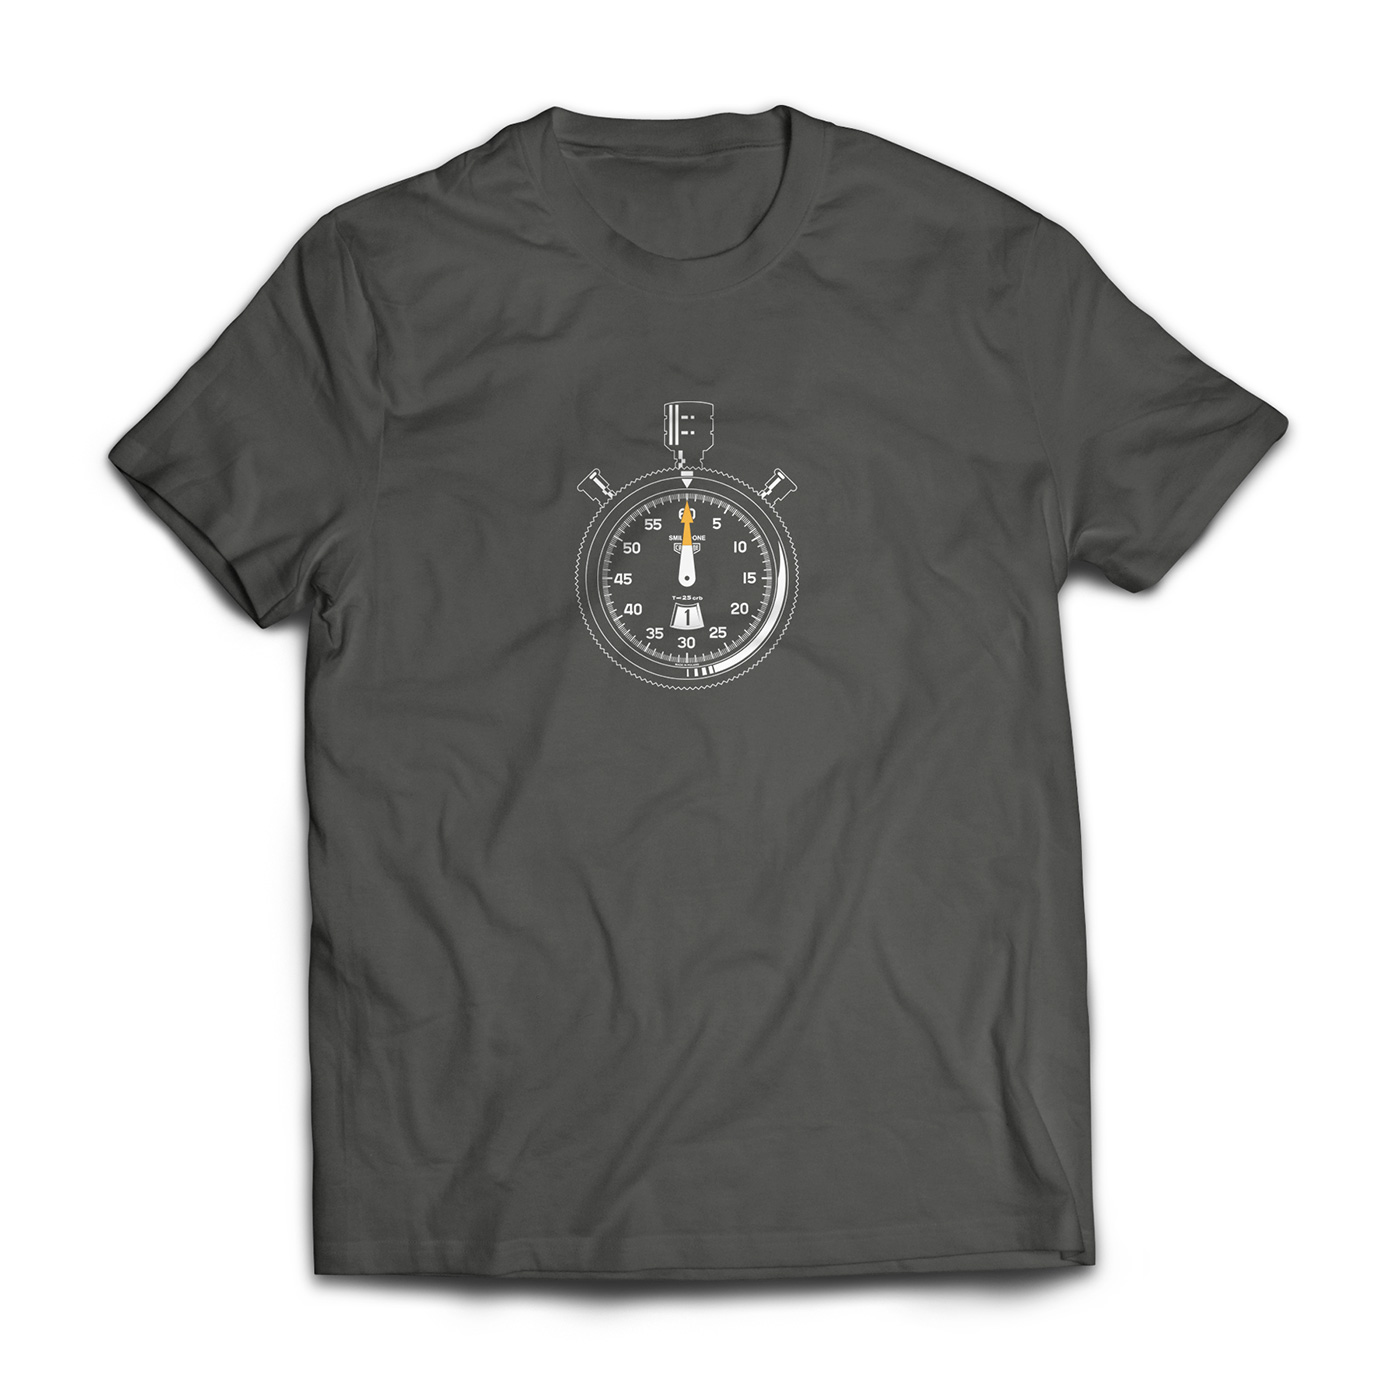 Smilodone t-shirt #2 with a Heuer Monte Carlo stopwatch